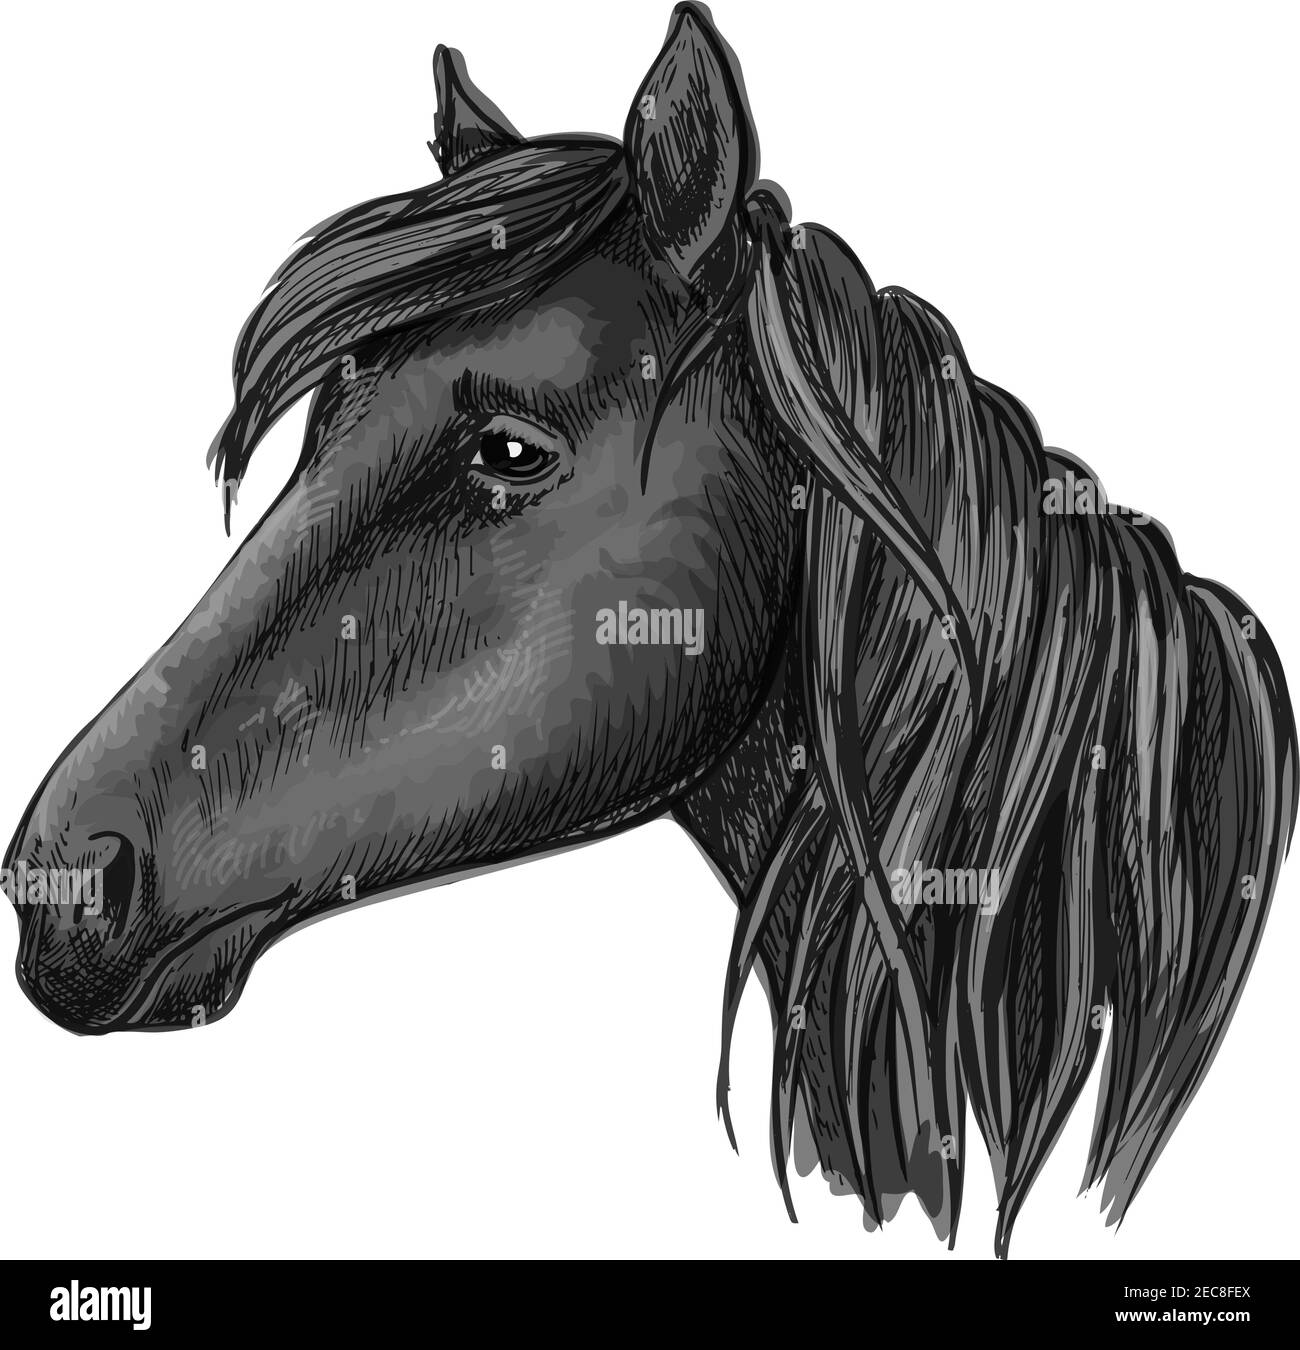 Black riding horse sketch with head of purebred arabian mare horse. For equestrian sporting competition, horse racing or t-shirt print design Stock Vector